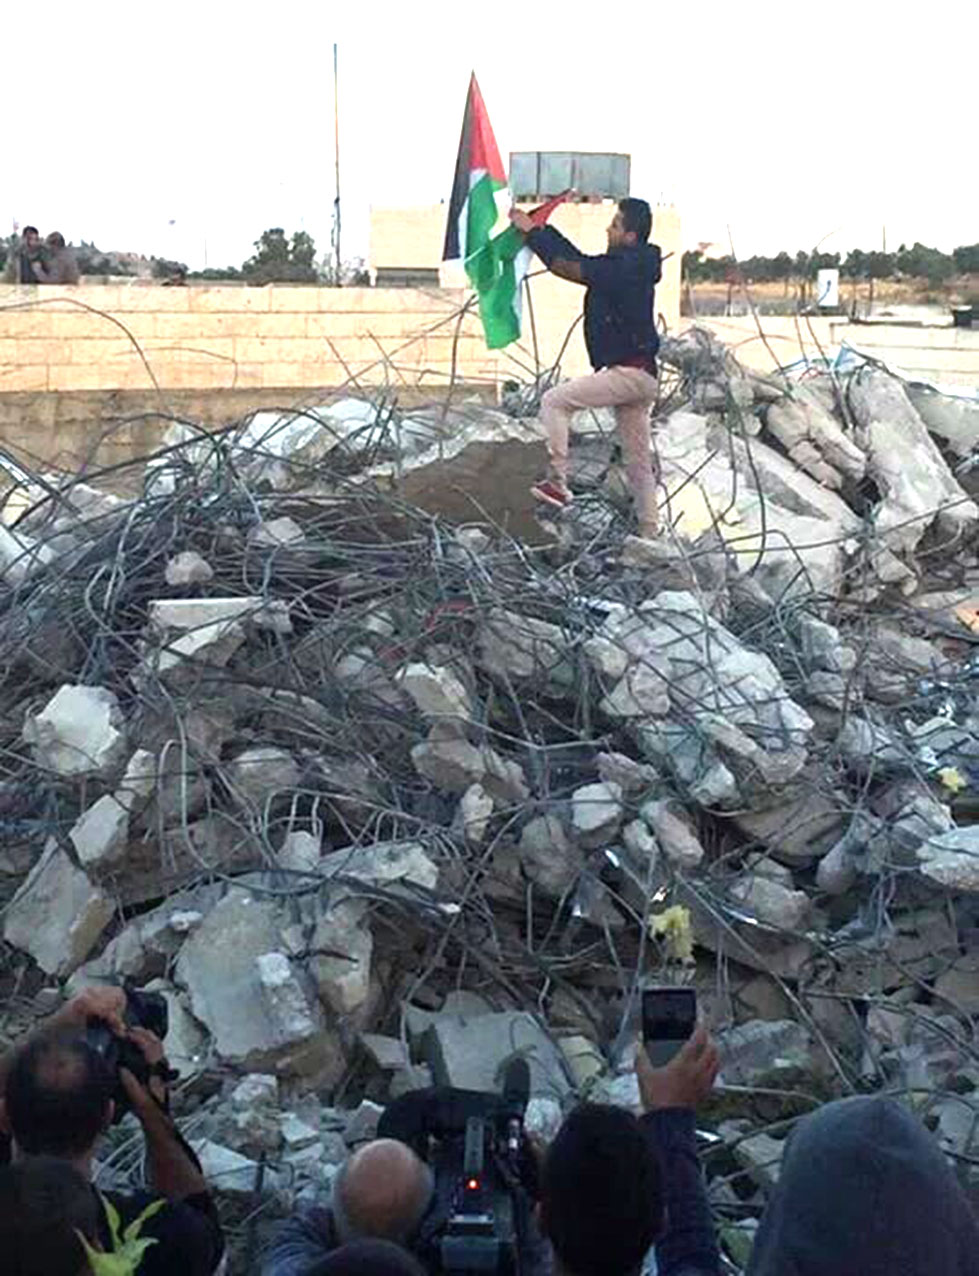 The Palestinian flag on the demolished home.